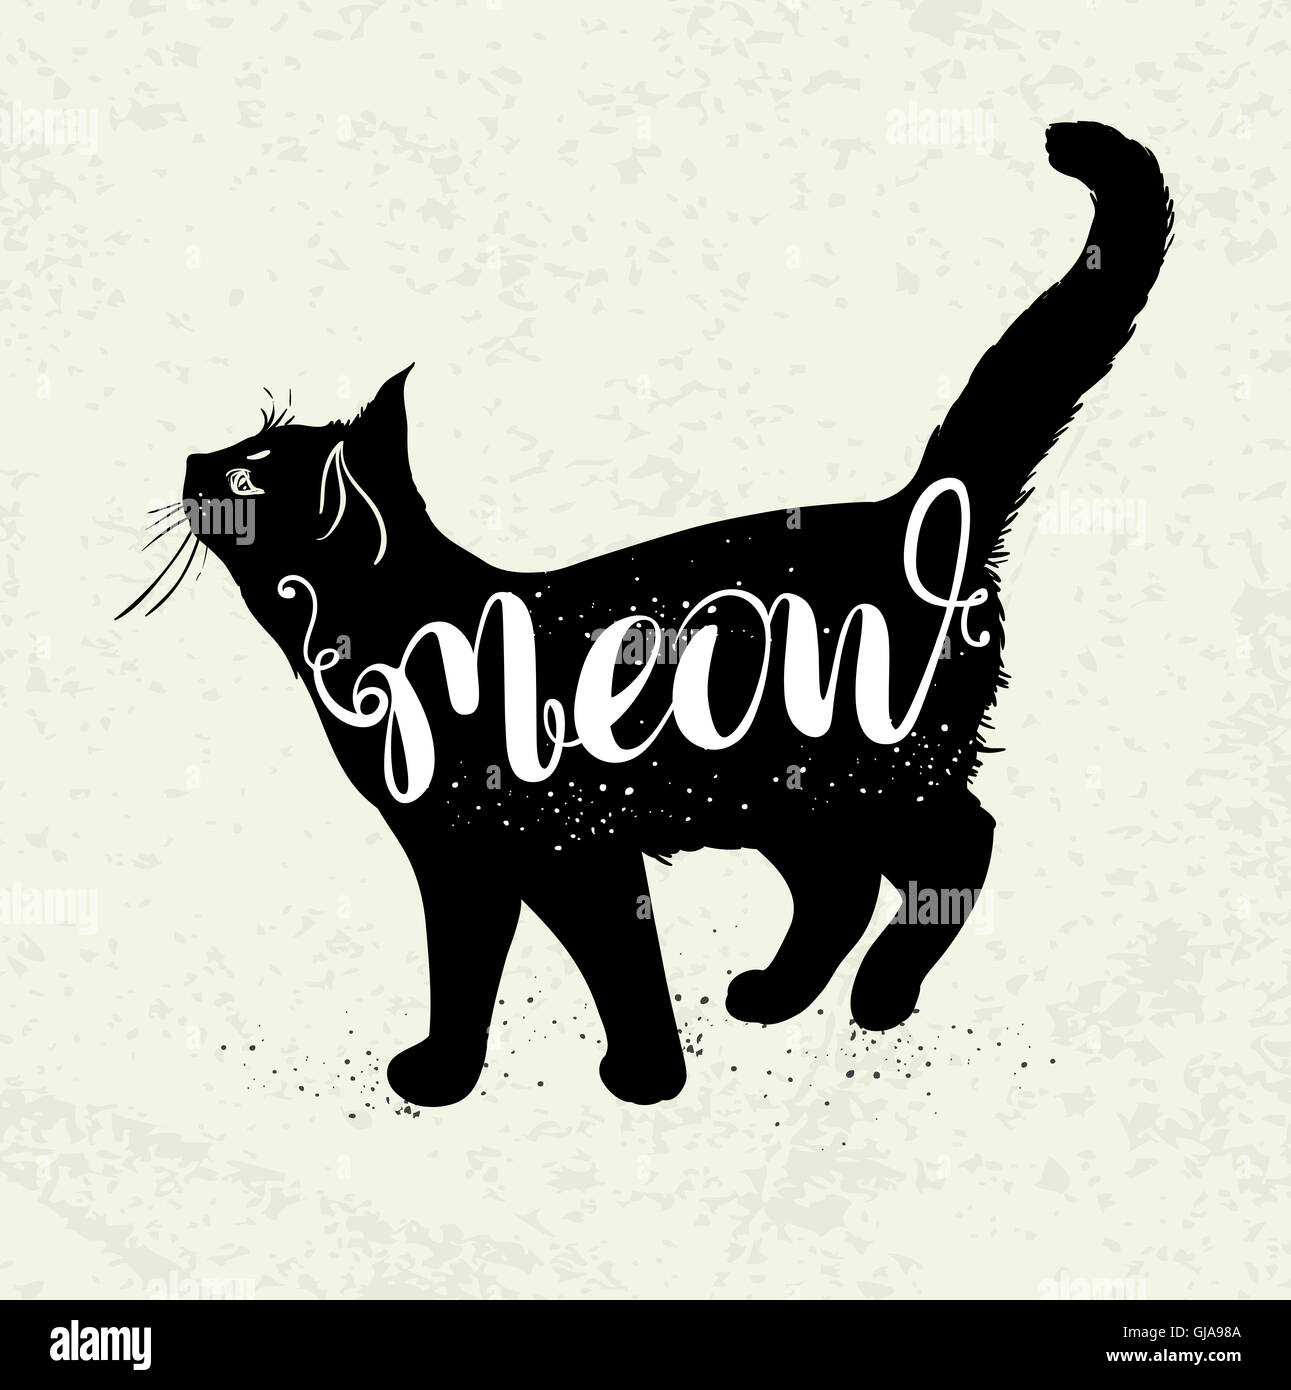 Background with black cat and lettering 'Meow'. Stock Photo